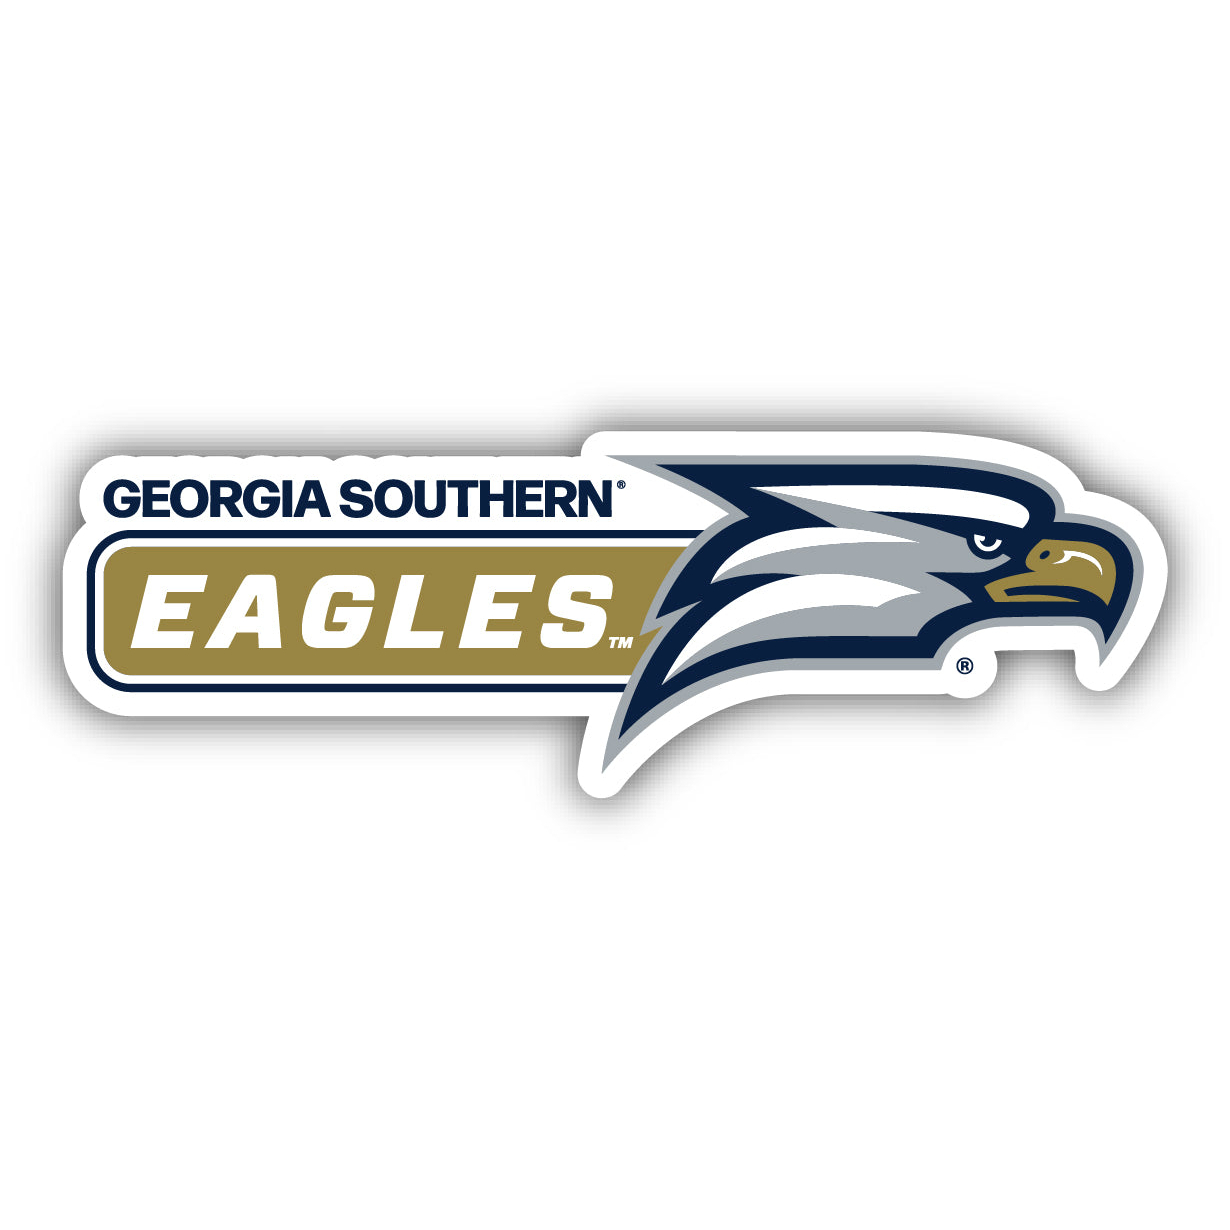 Georgia Southern Eagles 4 Inch Wide Colorful Vinyl Decal Sticker